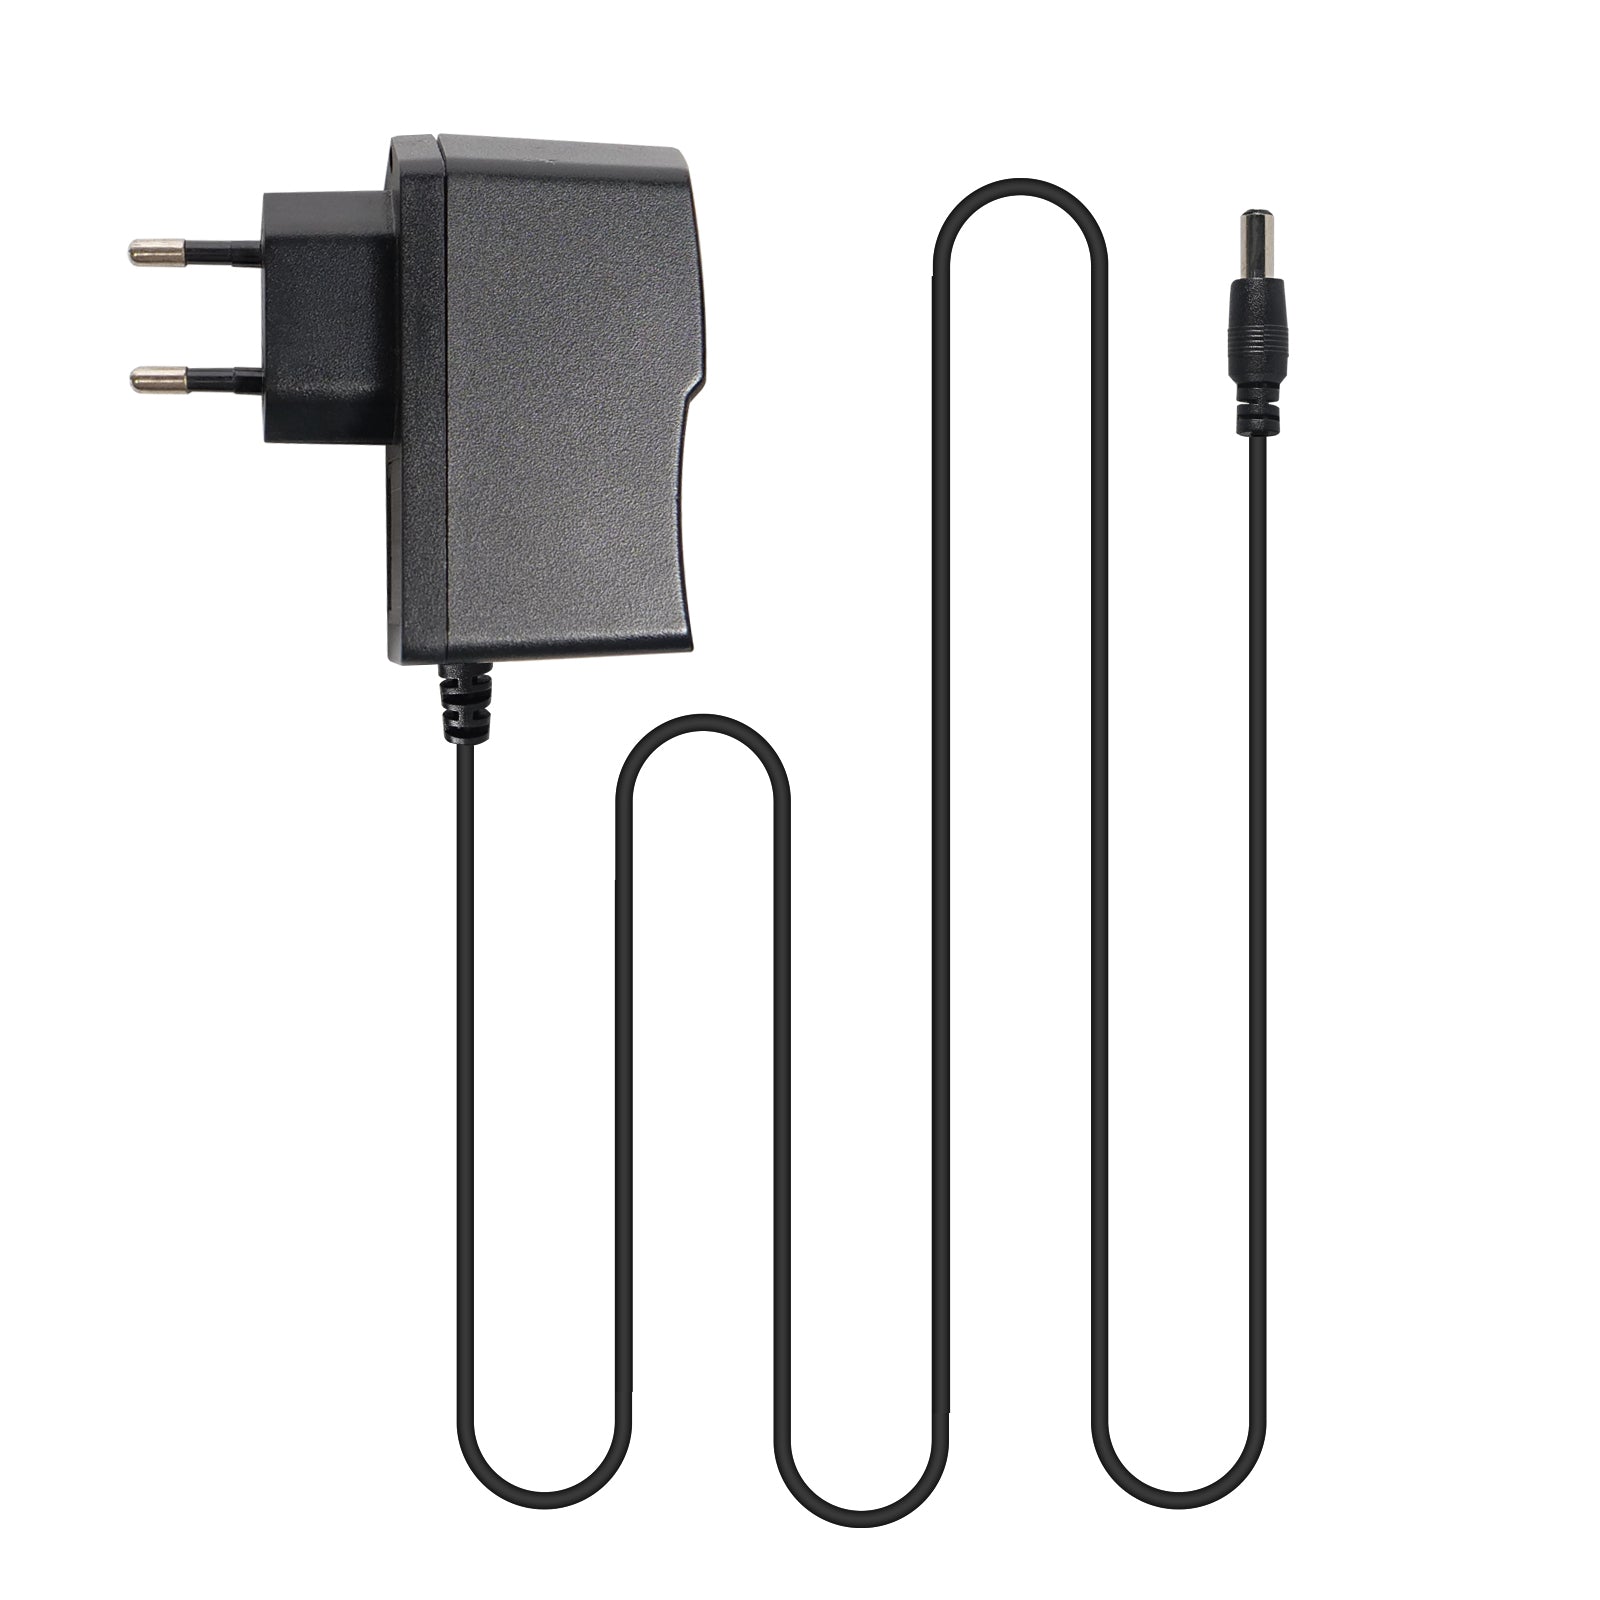 Phenyx Pro Power Adapter for Wireless System